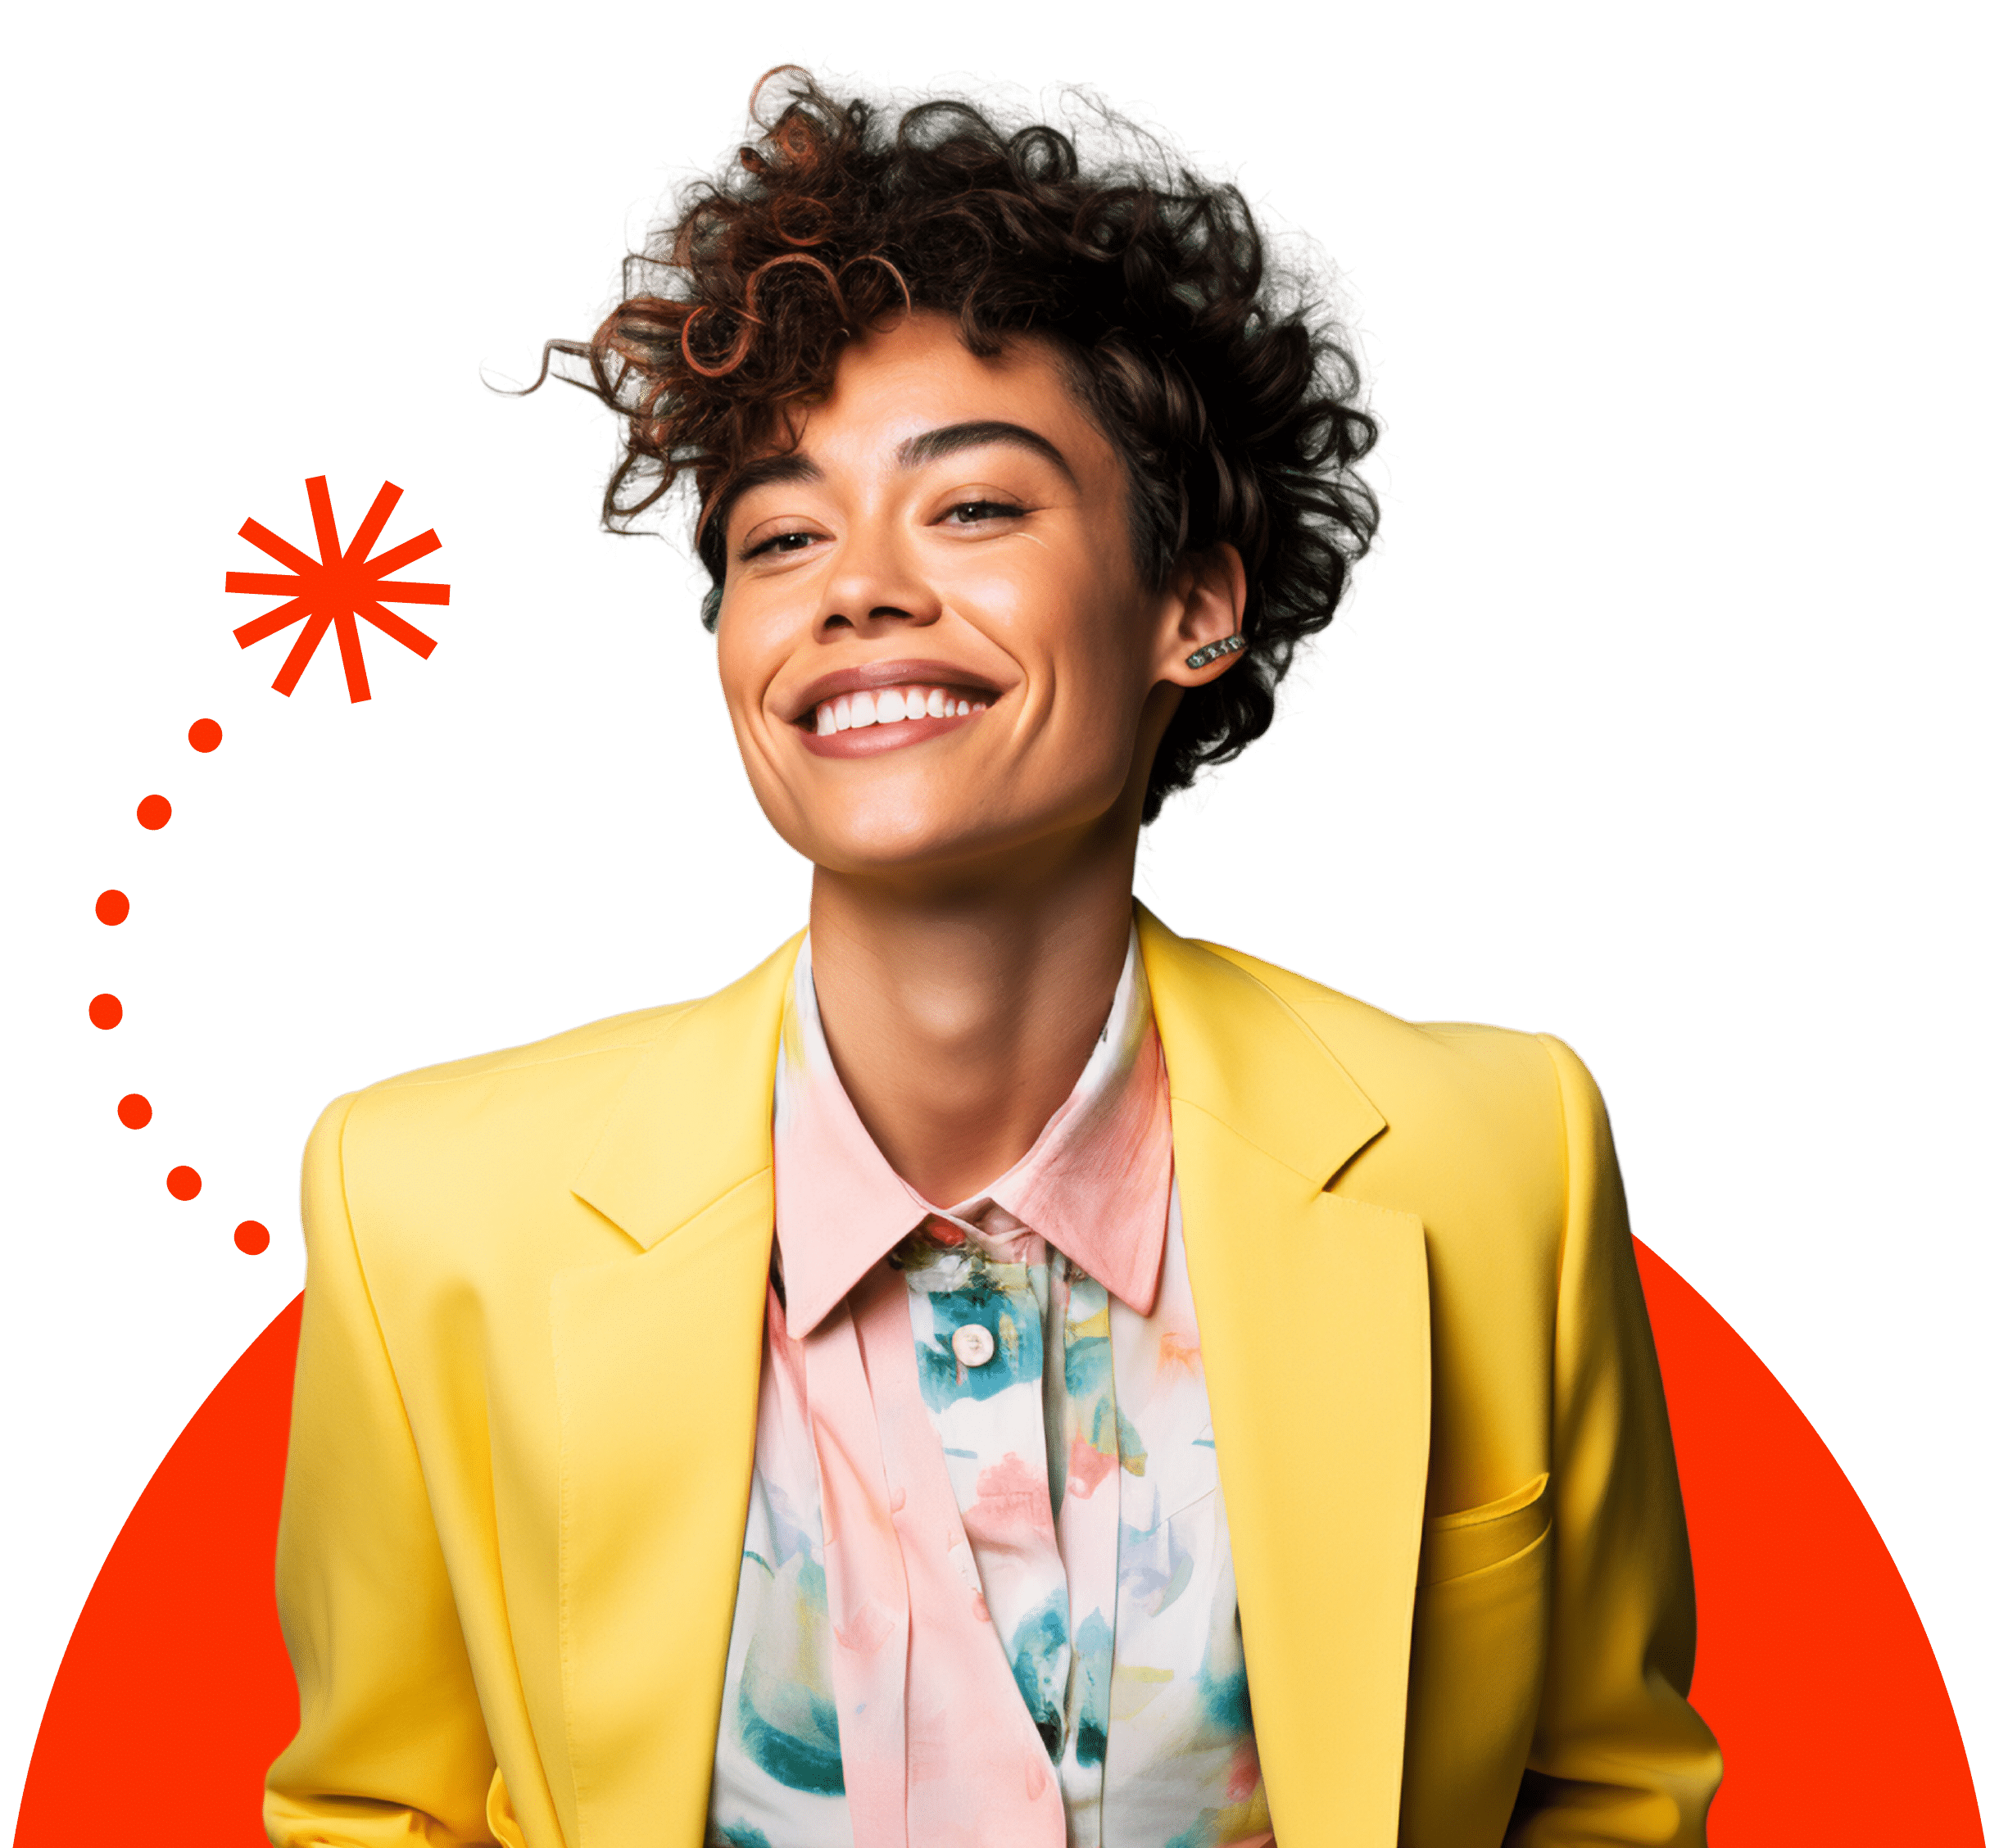 Woman smiling wearing a yellow blazer with a floral top, with orange graphics in the backgorund.